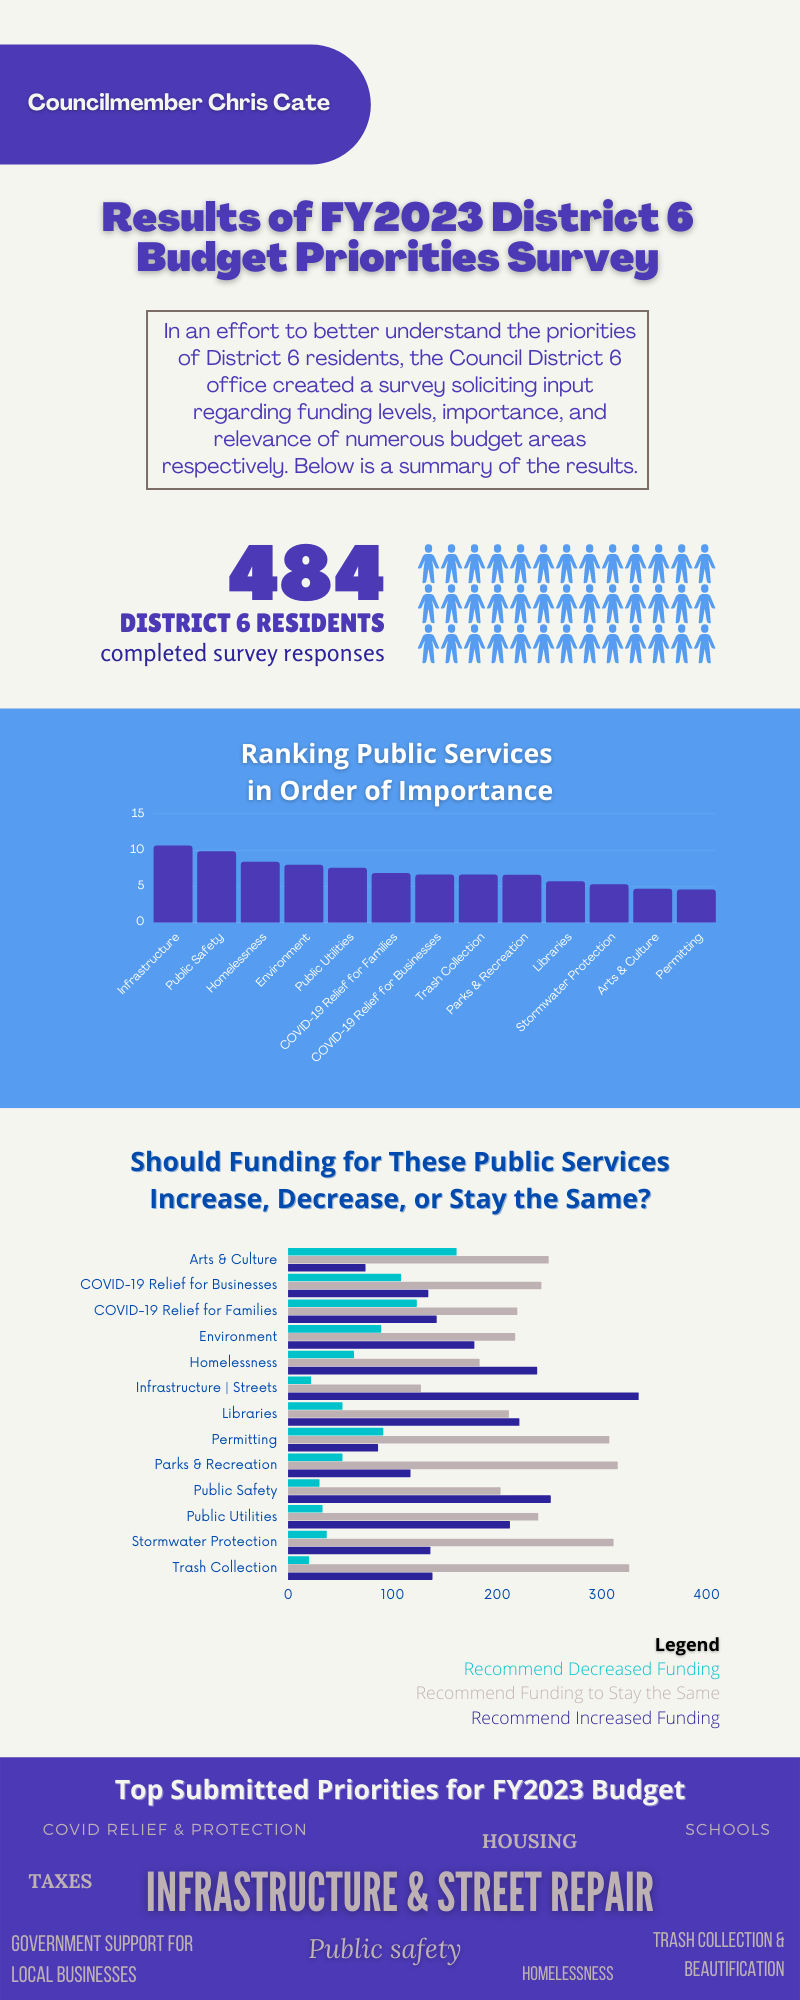 Results of FY2023 District 6 Budget Priorities Survey